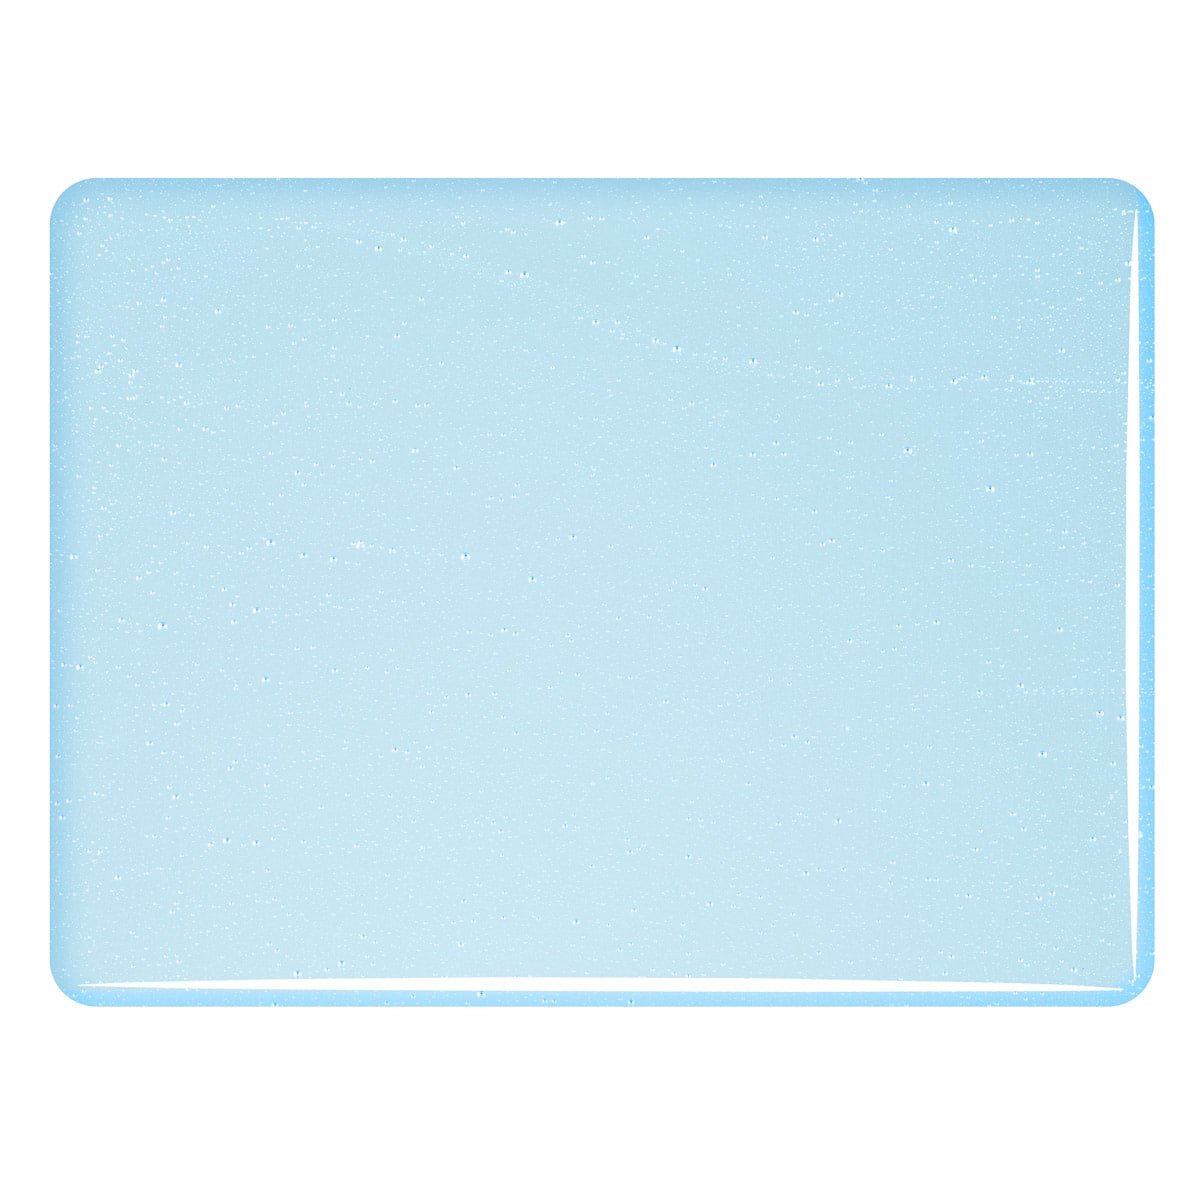 001816 Turquoise Blue Tint transparent sheet glass swatch